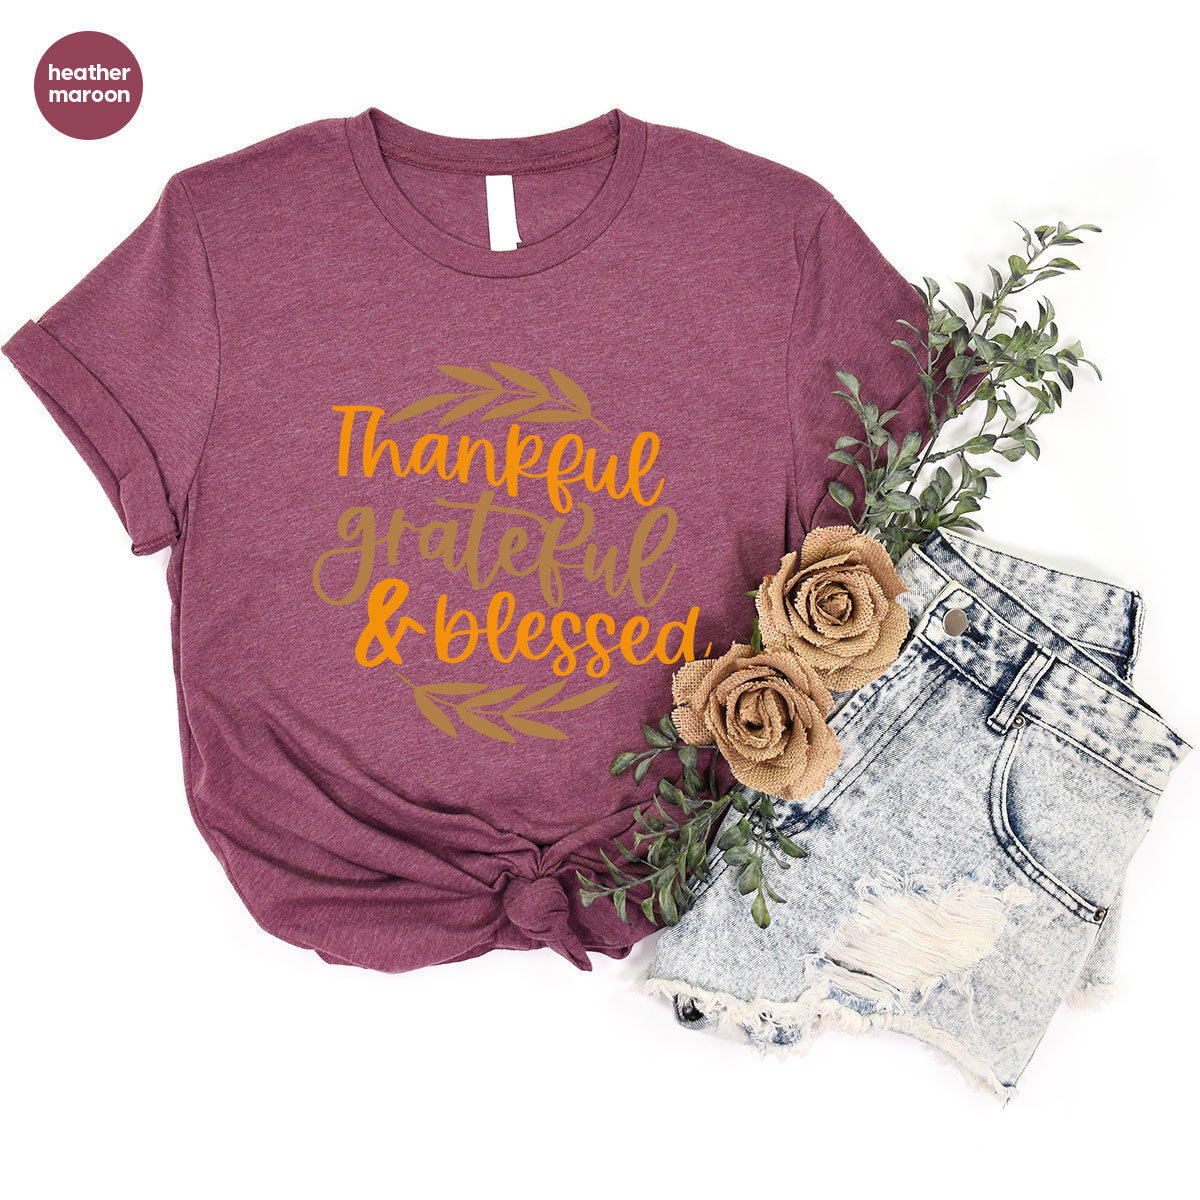 Fall Tshirt, Autumn Clothing, Gift for Her, Happy Thanksgiving Outfit, Leaves Graphic Tees, Thankful Grateful Blessed T-Shirt